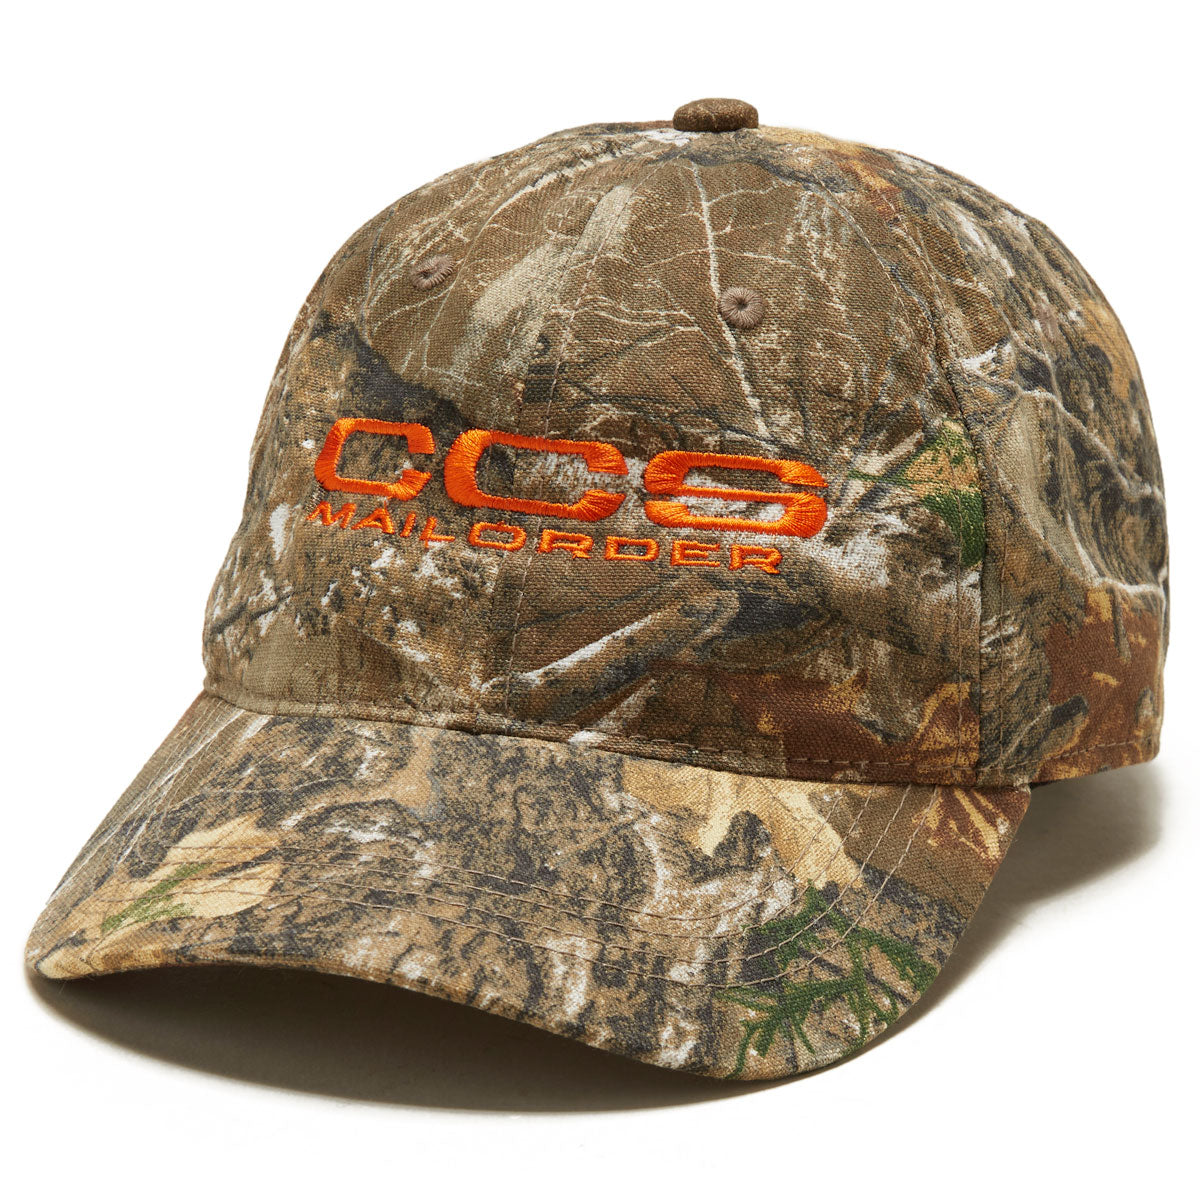 CCS x Realtree Embroidered Mailorder Hat - Edge image 1